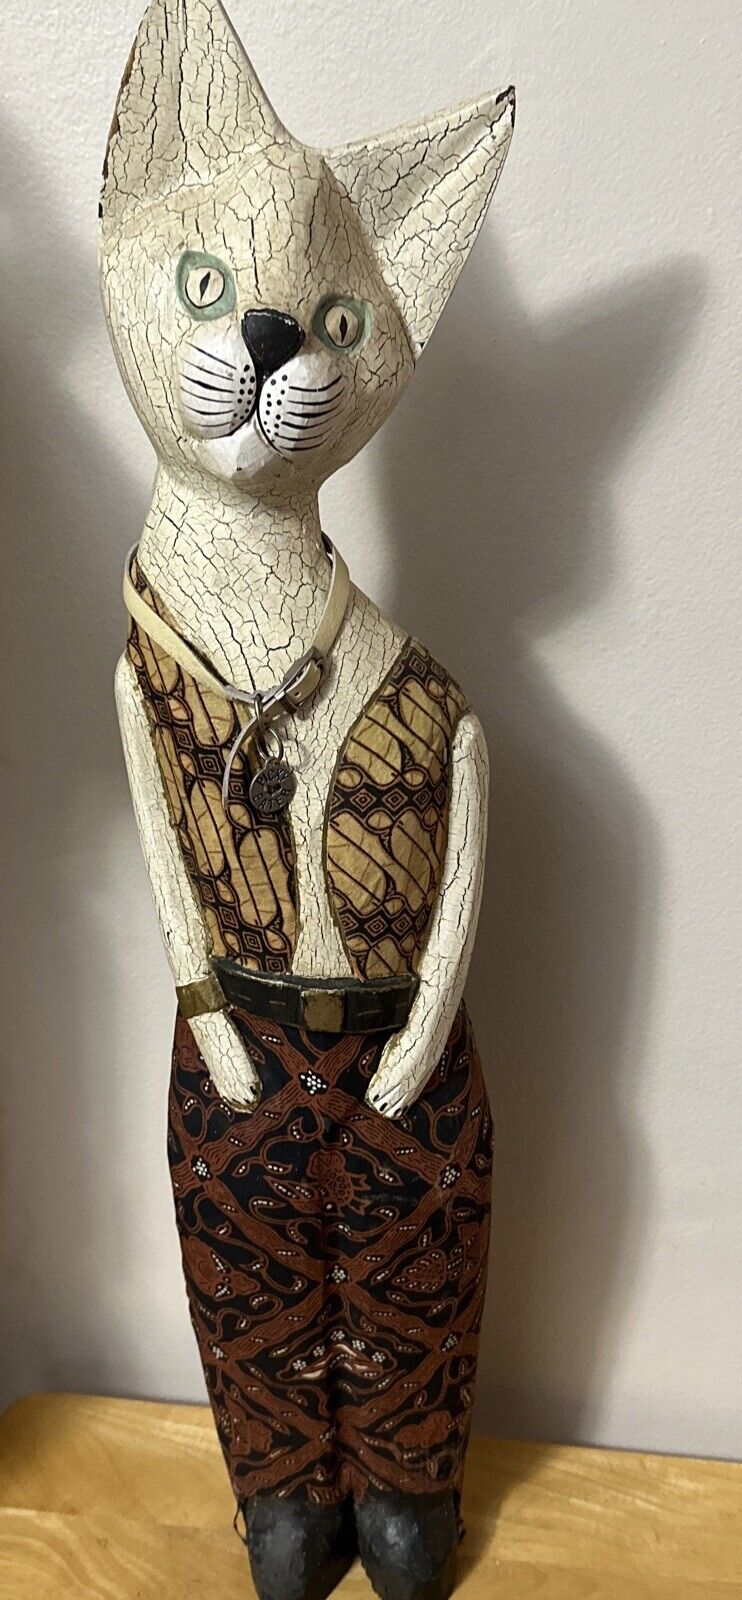 Cat Statue Wood Hand Carved & Painted Bali Indonesia 31”Tall Whimsical Cat Batik